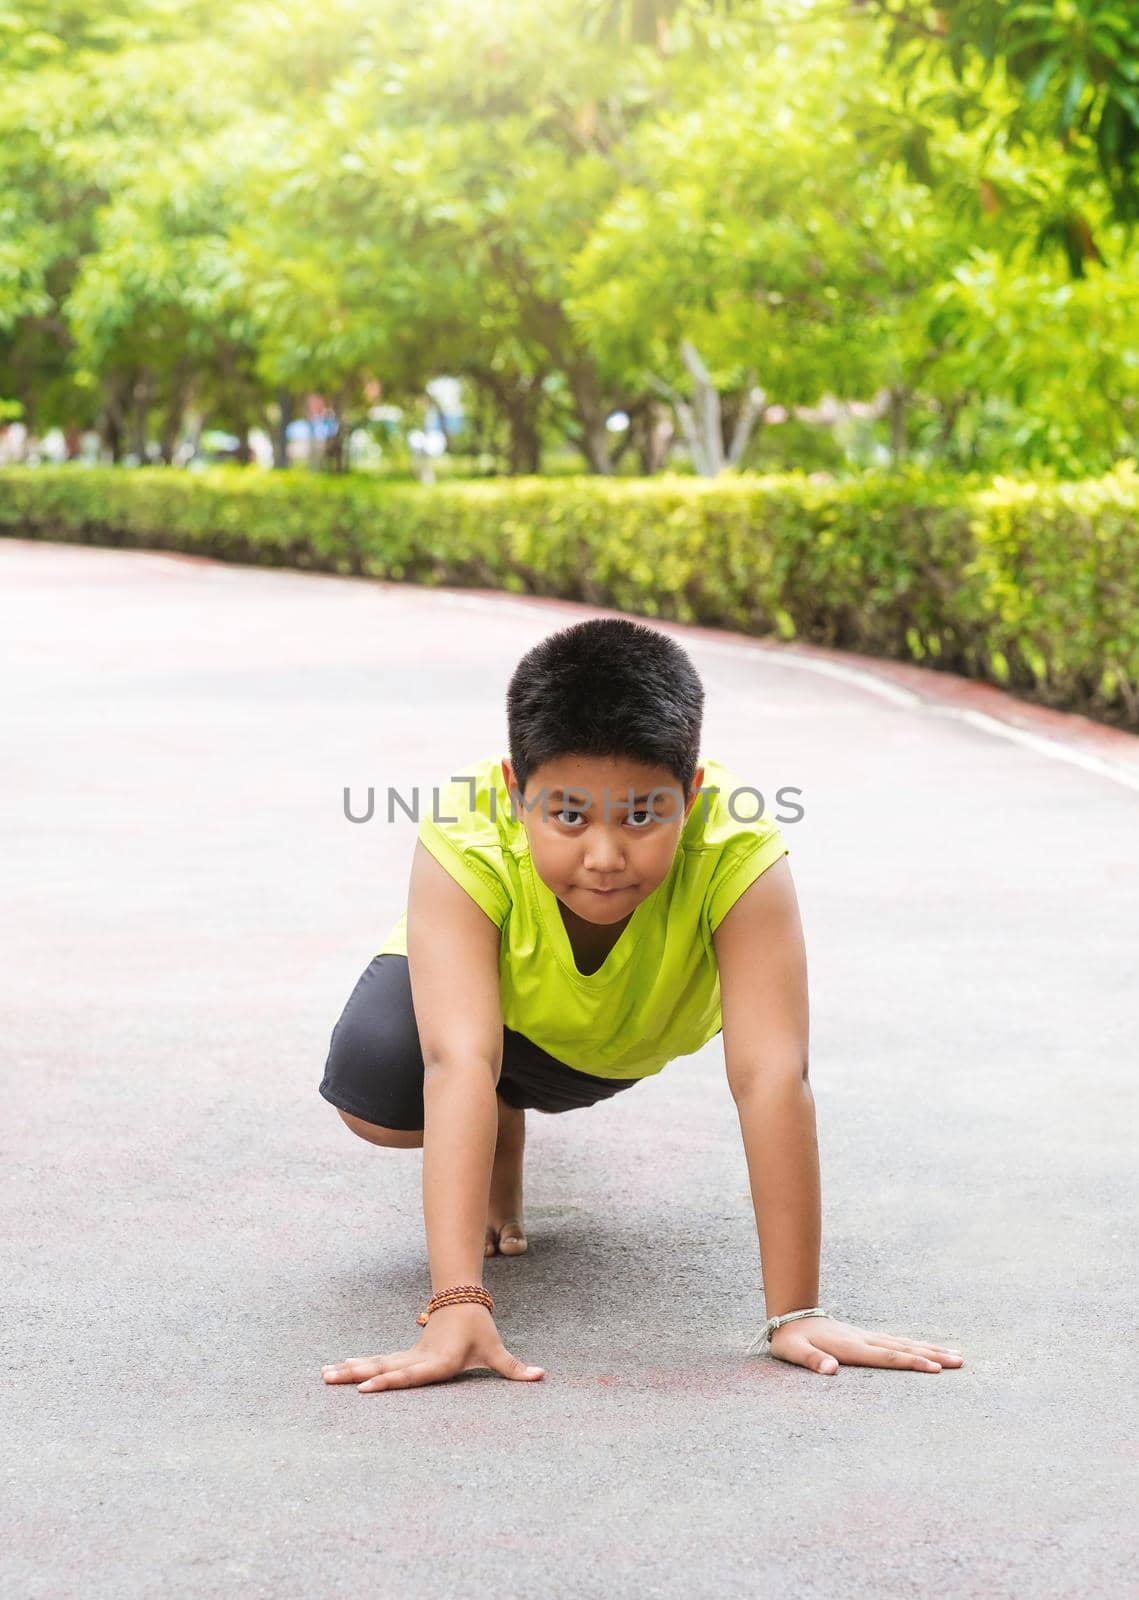 Young Asian boy prepare to start running on track in the garden during day time to practice himself